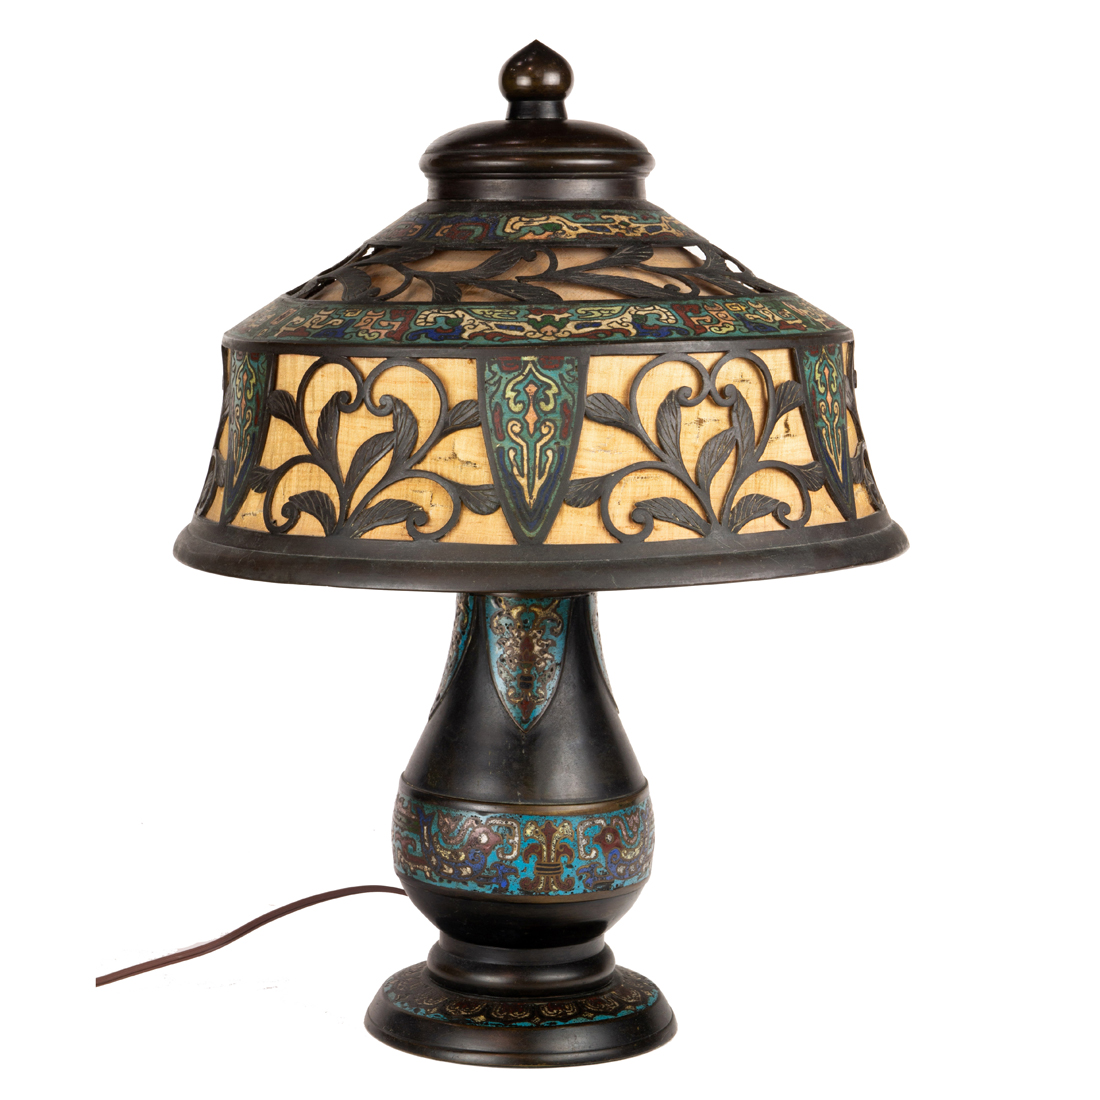 A JAPANESE CHAMPLEVE LAMP IN THE